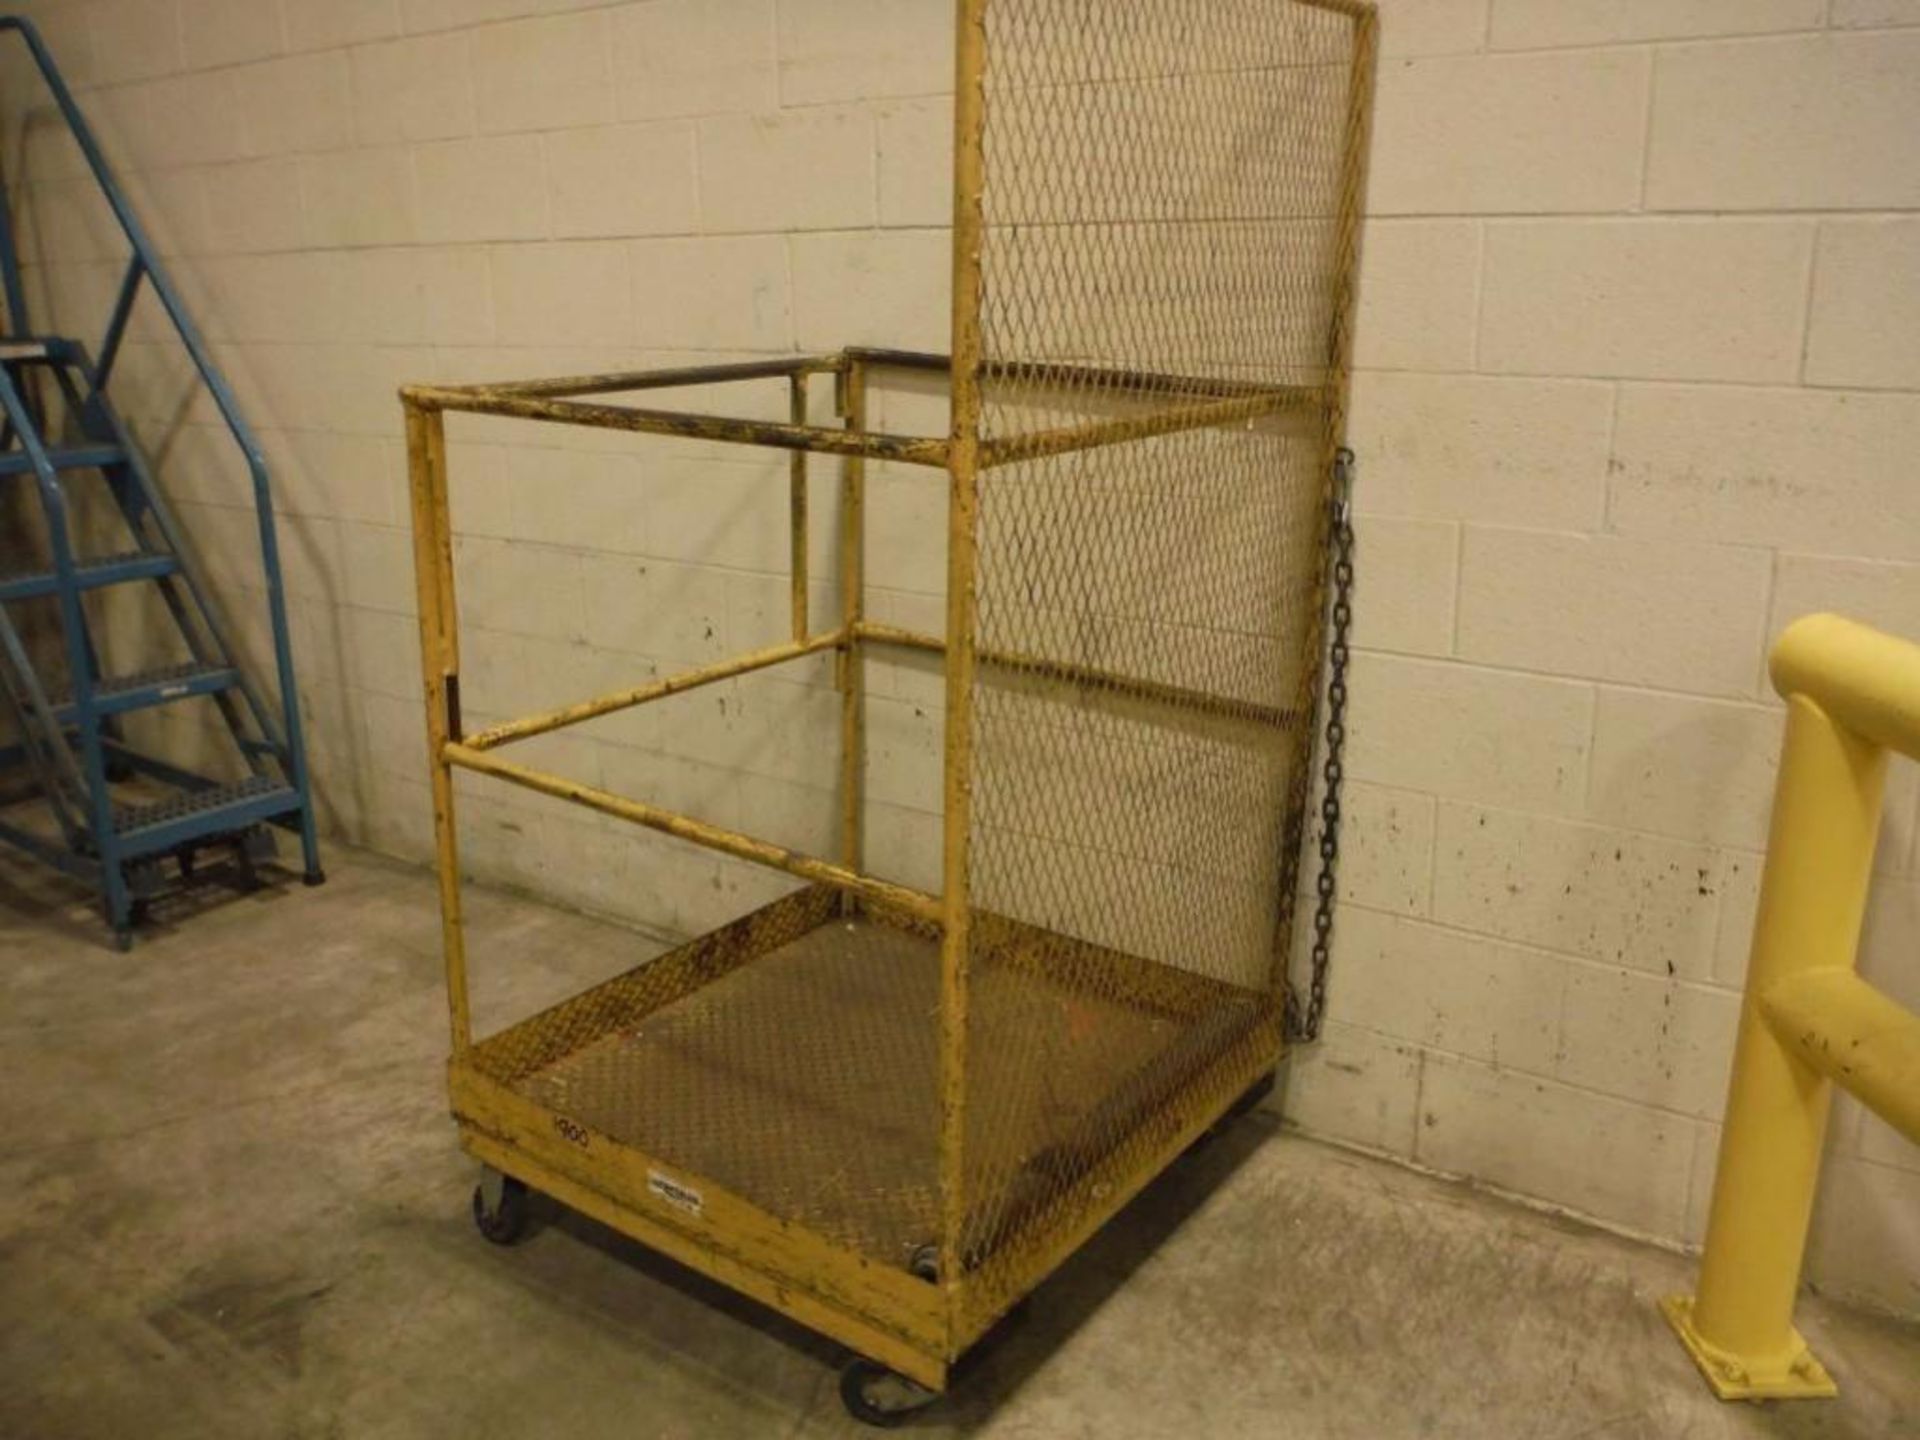 Man Cage, 3ft x 3ft  Rigging Fee: $0